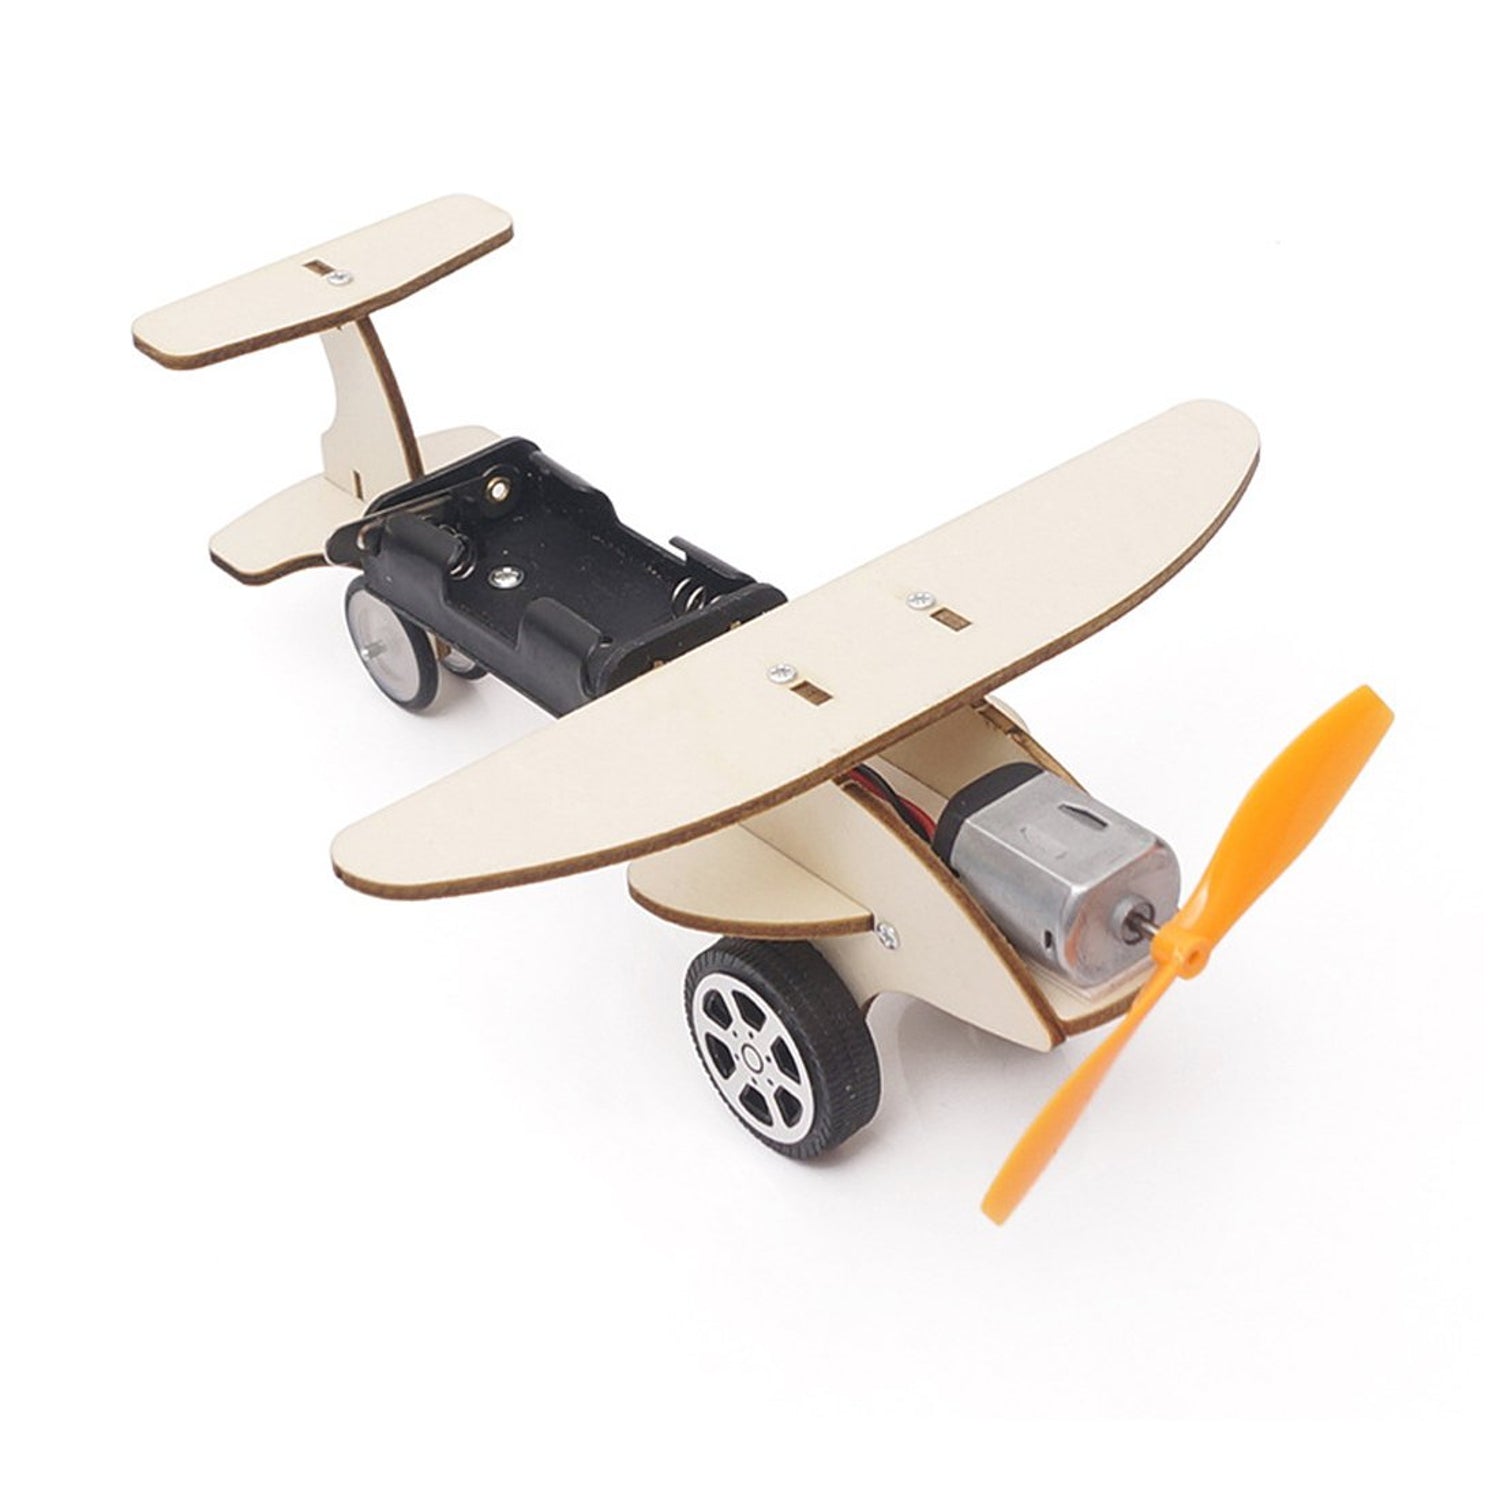 diy-3d-wooden-plane-hand-generator-physical-learning-toy-science-kit.jpg